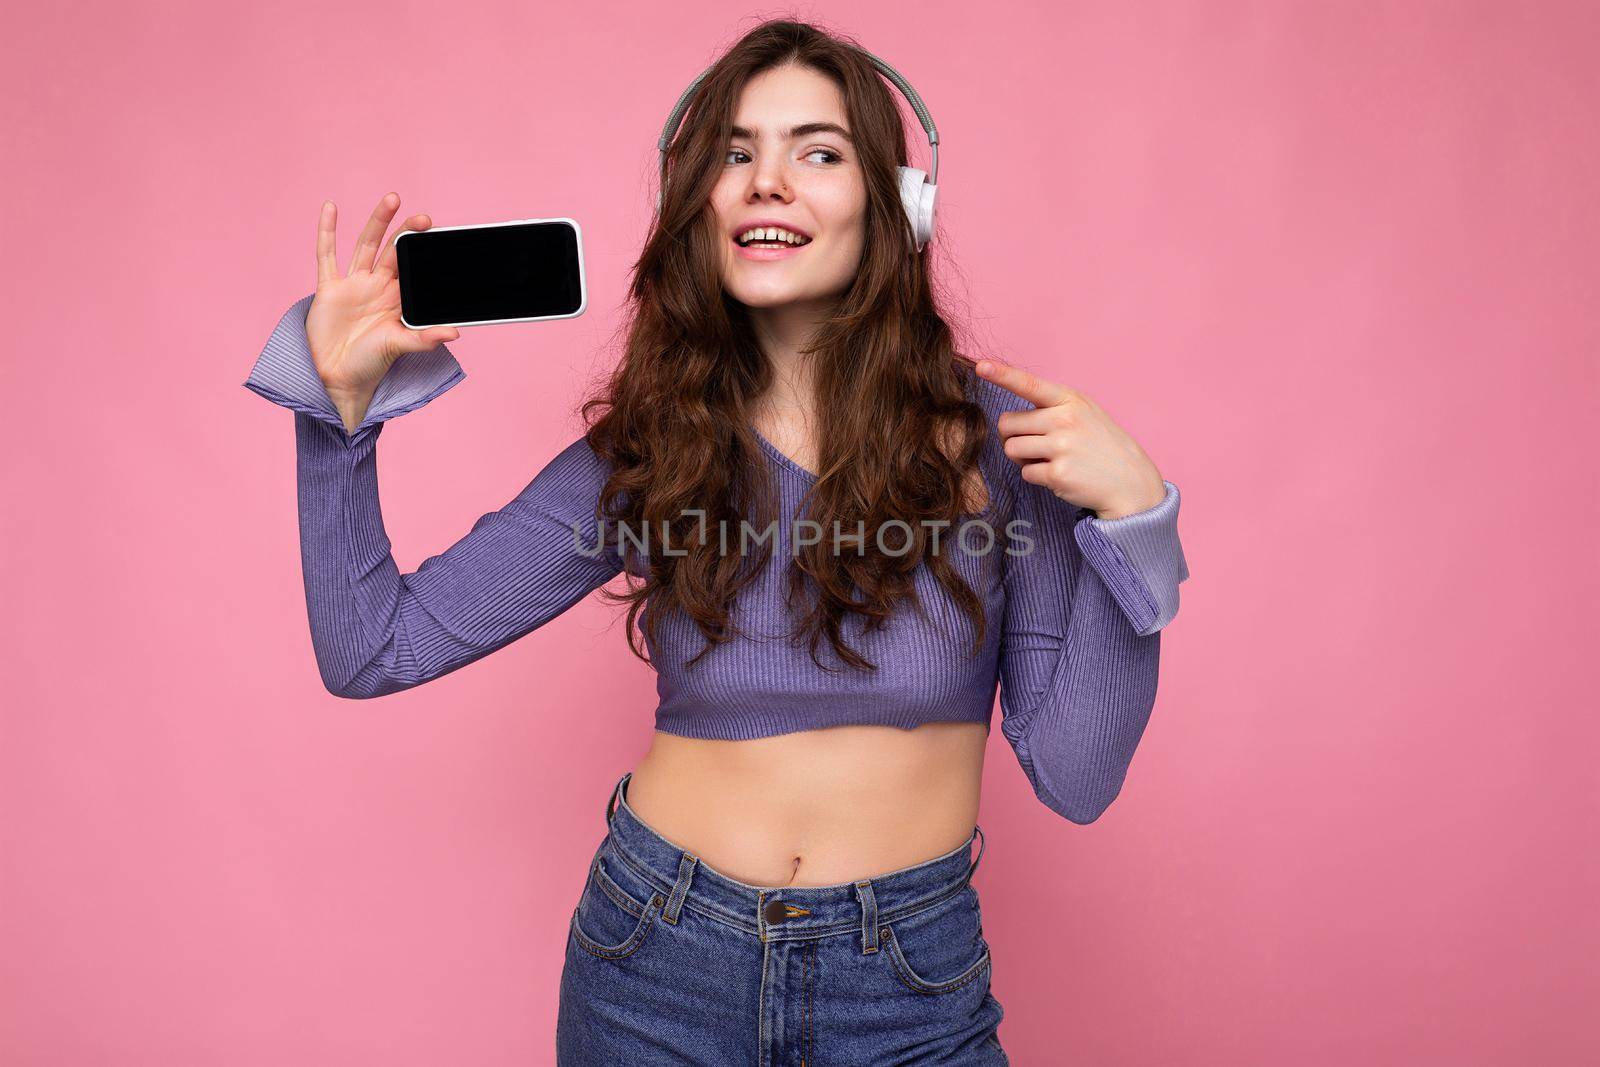 Attractive positive smiling young woman wearing stylish casual outfit isolated on colourful background wall holding and showing mobile phone with empty screen for cutout wearing white bluetooth headphones and having fun looking to the side.